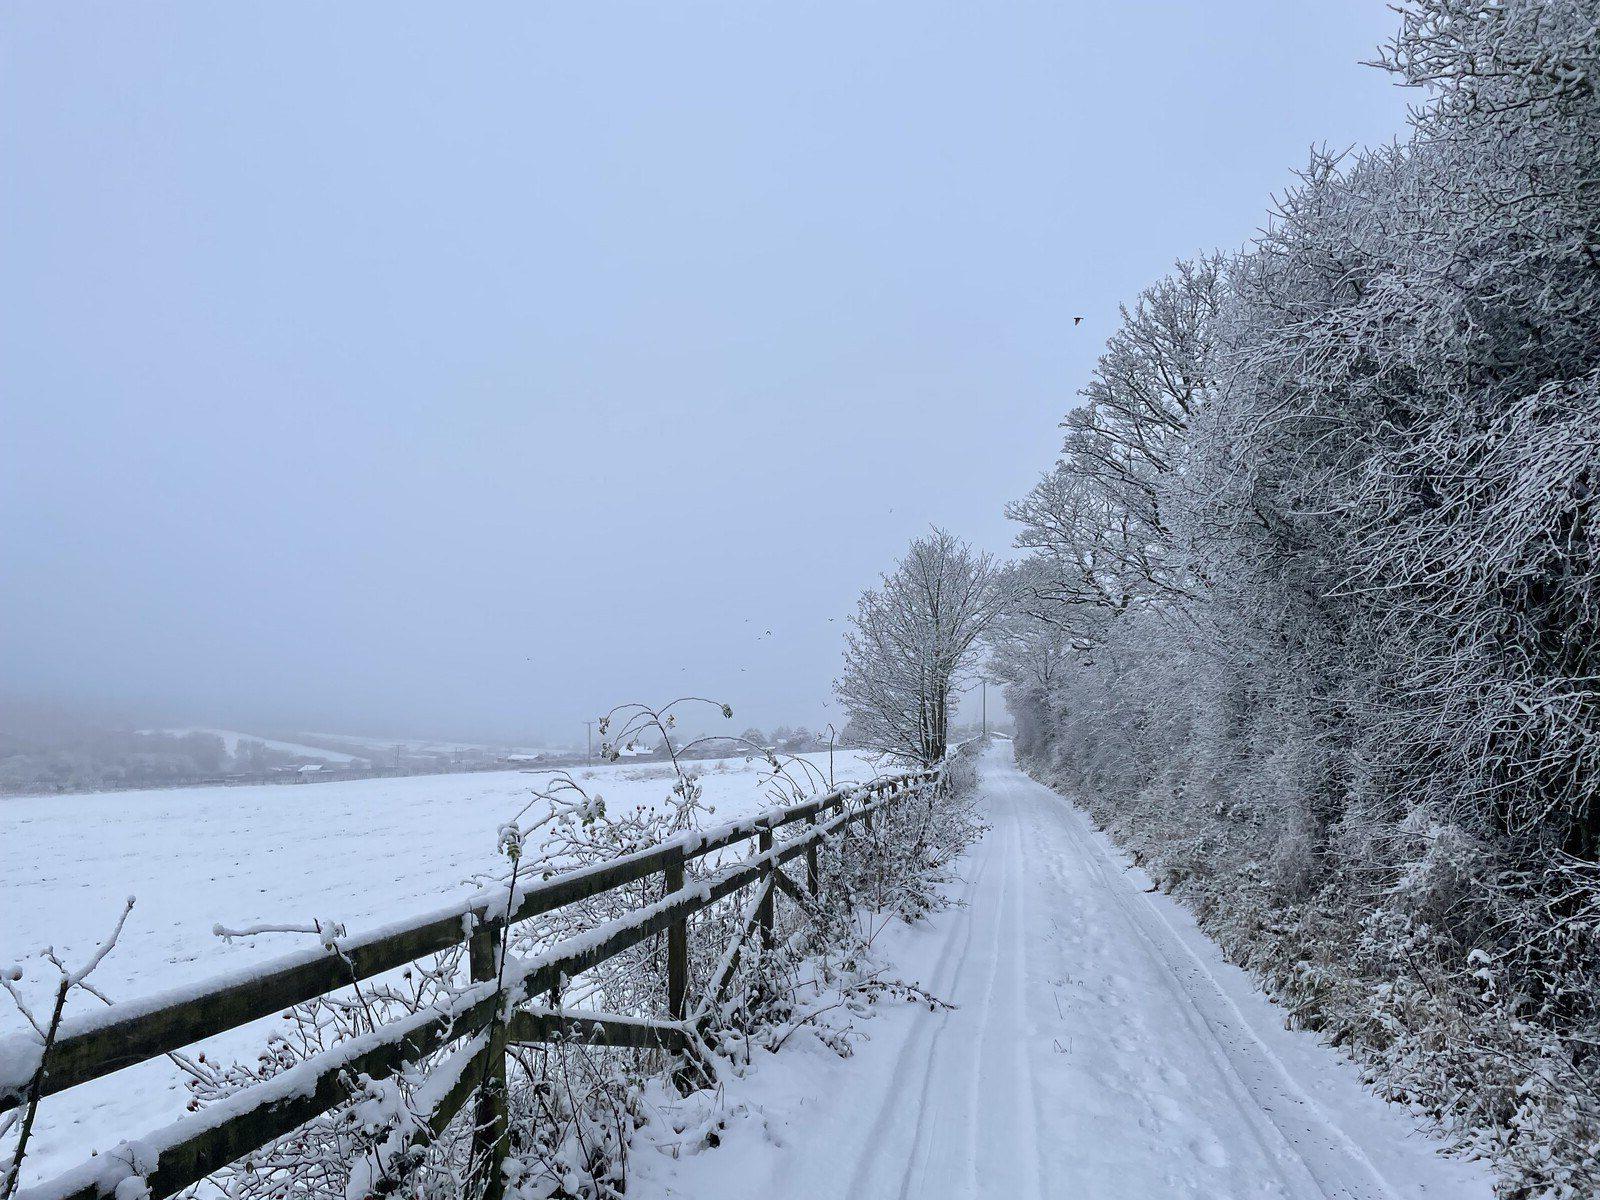 A snowy track with leafless trees on the right; on the left, a fence with a field beyond, and some hills rising in the fog.